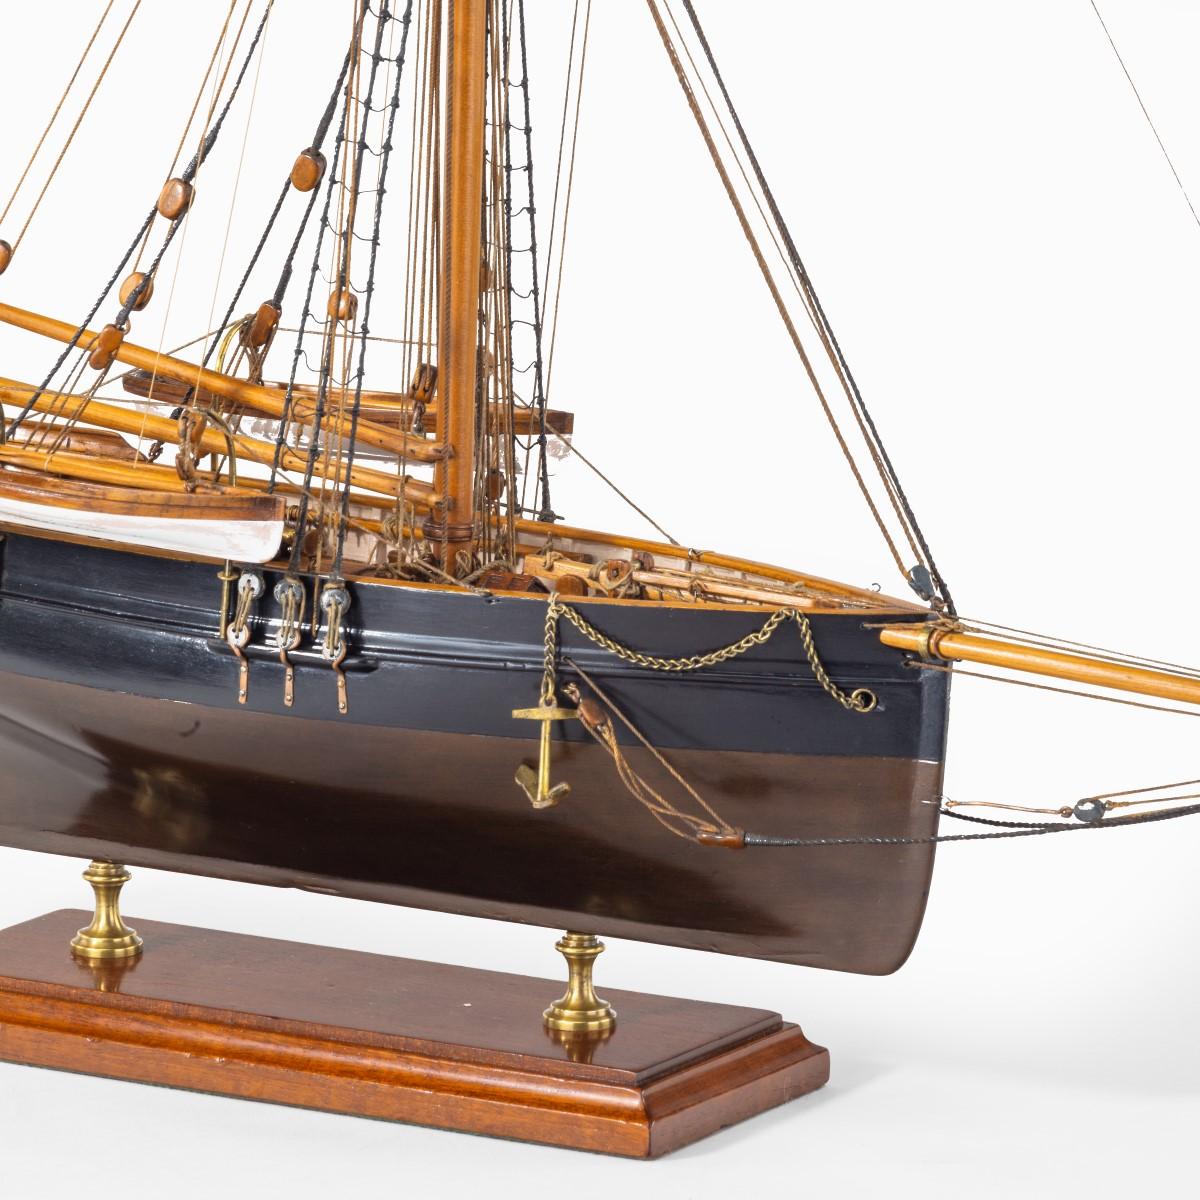 Shipyard Model of a Gaff-Rigged Newhaven Smack 9